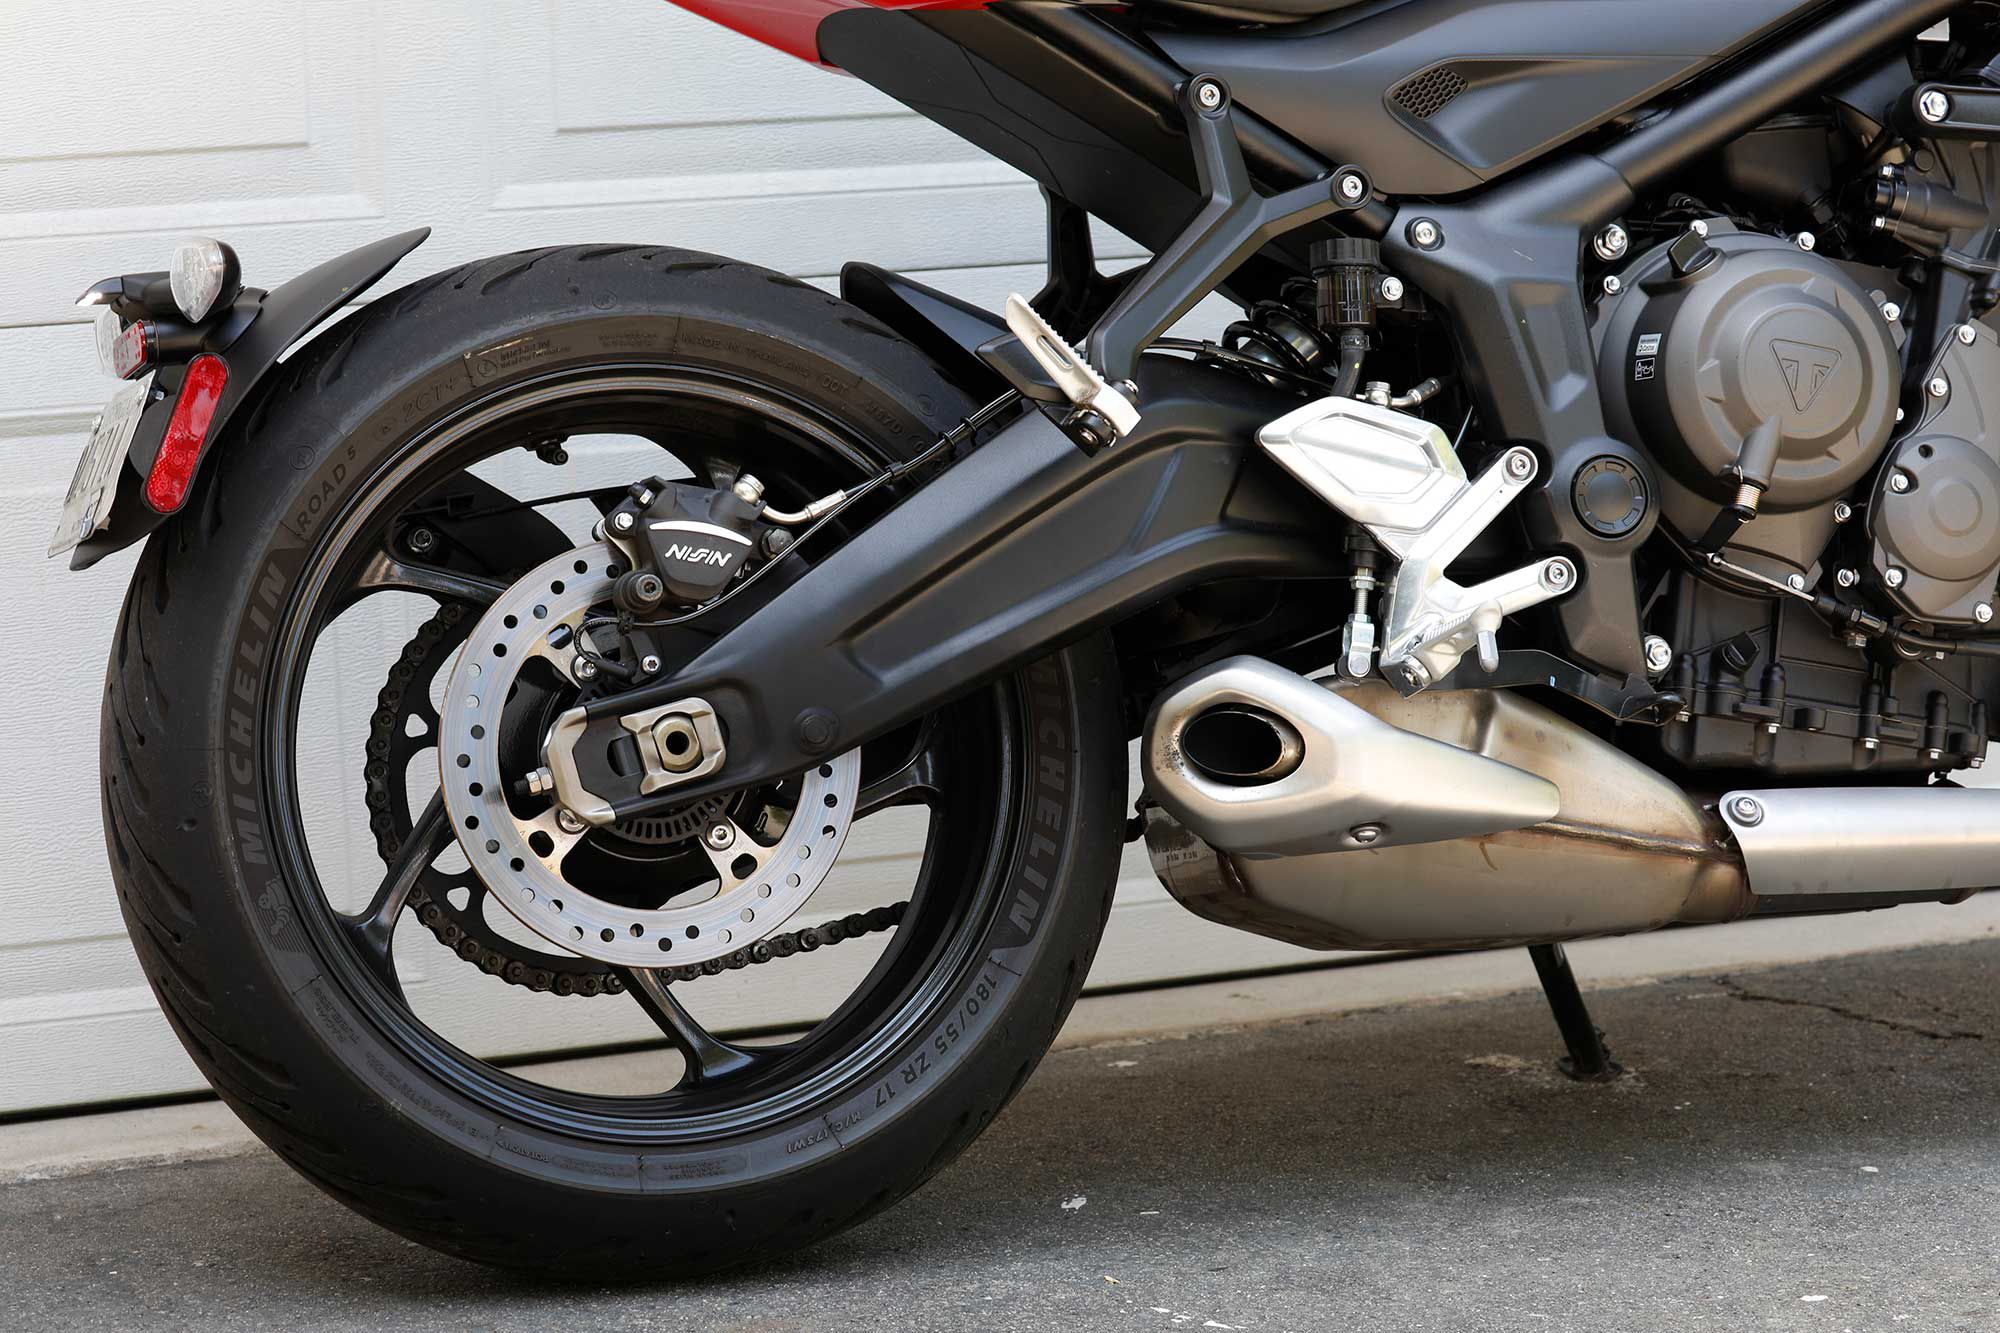 We’re big fans of the Trident’s oversized rear brake disc. A shapely swingarm hides the shock linkage.